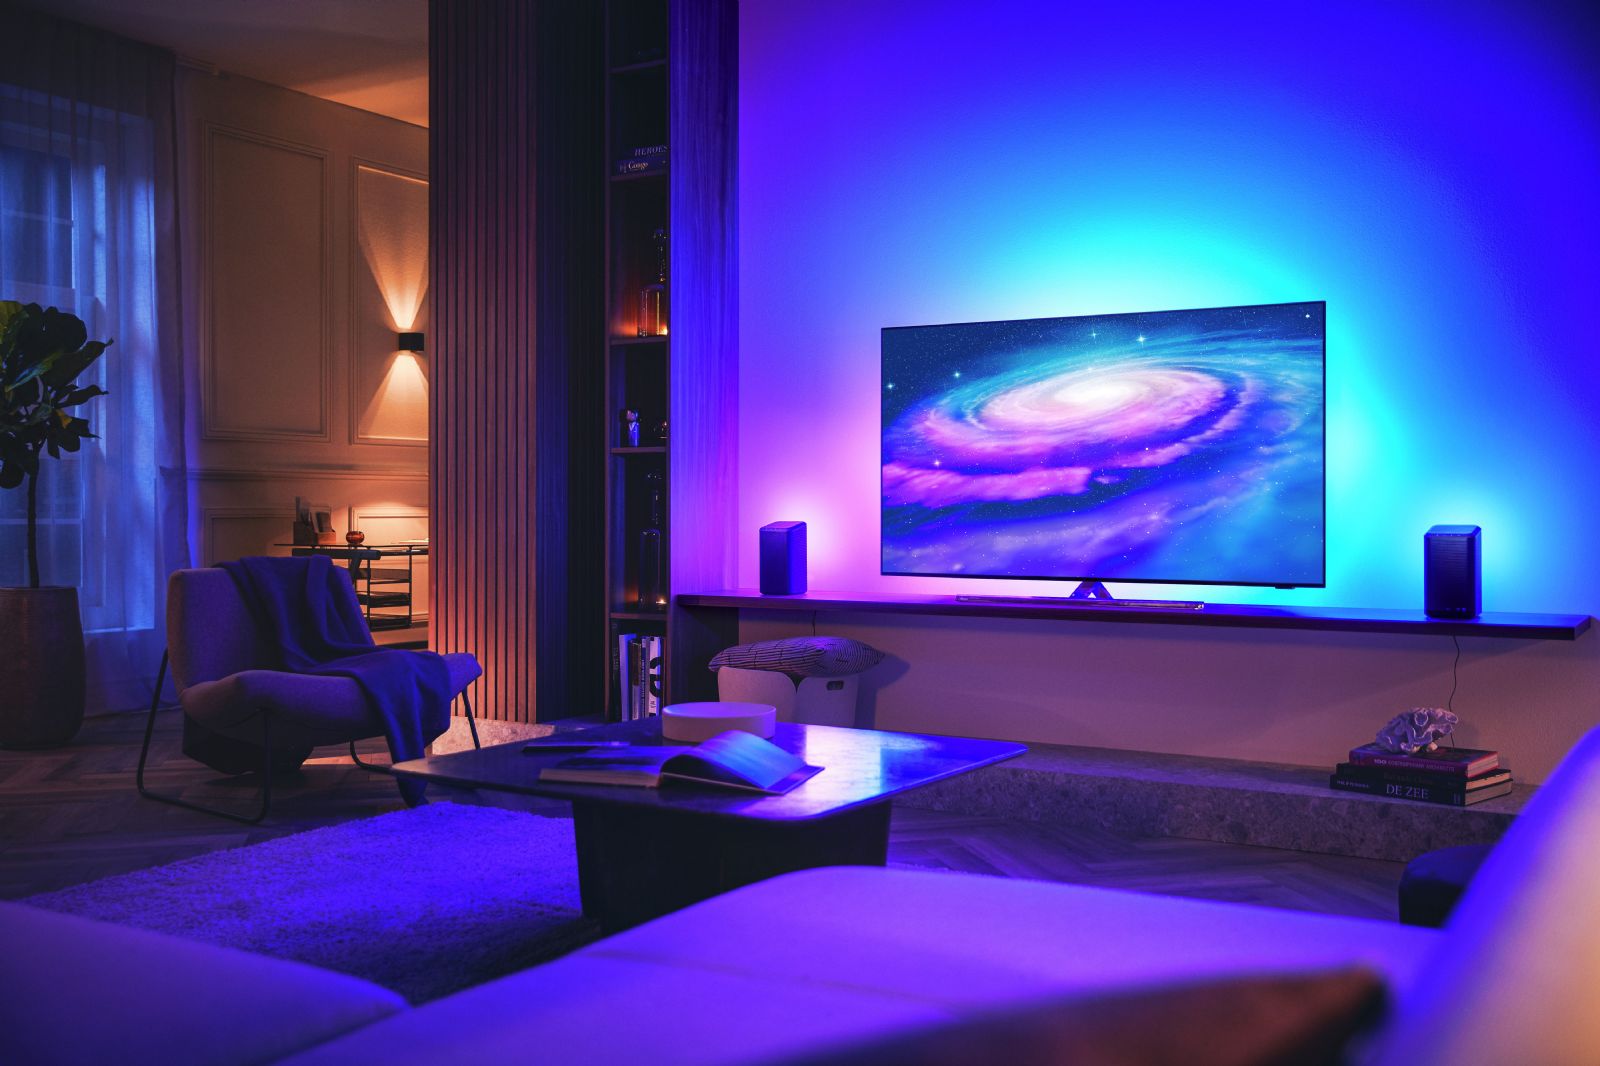 TV-apparater Philips 65OLED807 65-tums 4K UHD Smart OLED-TV